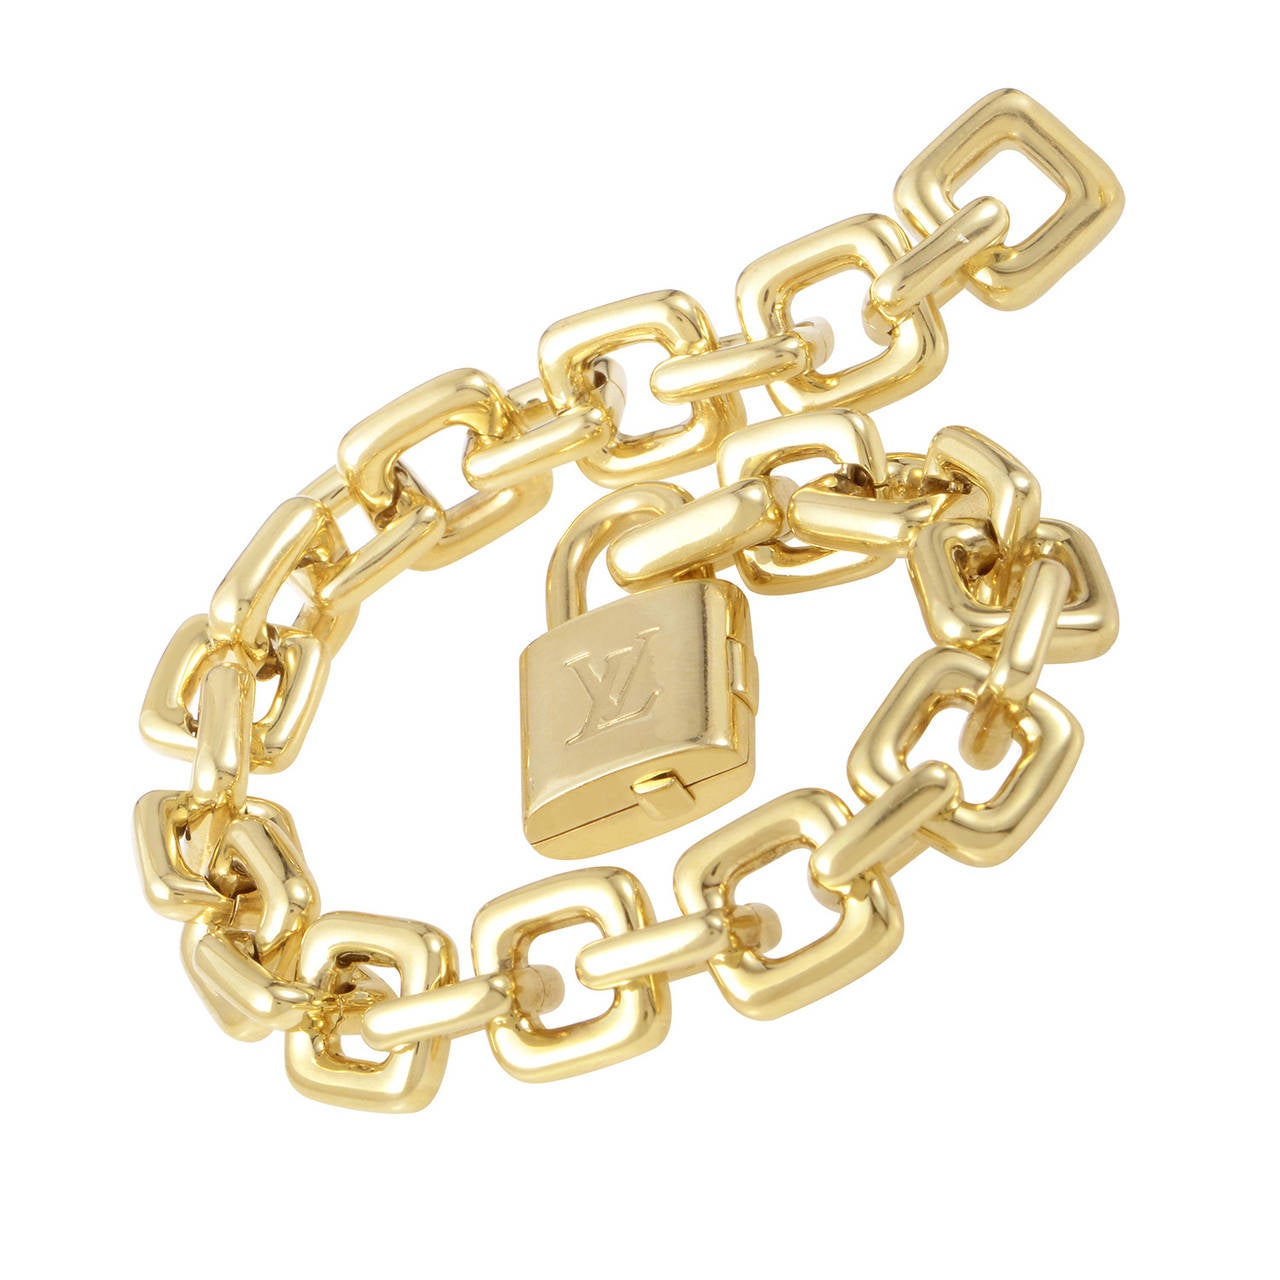 Spectacularly fashionable and extravagant, this massive Louis Vuitton bracelet will effectively beautify your style whatever the occasion; the bracelet is made of radiant 18K yellow gold and weighs astonishing 94 grams.